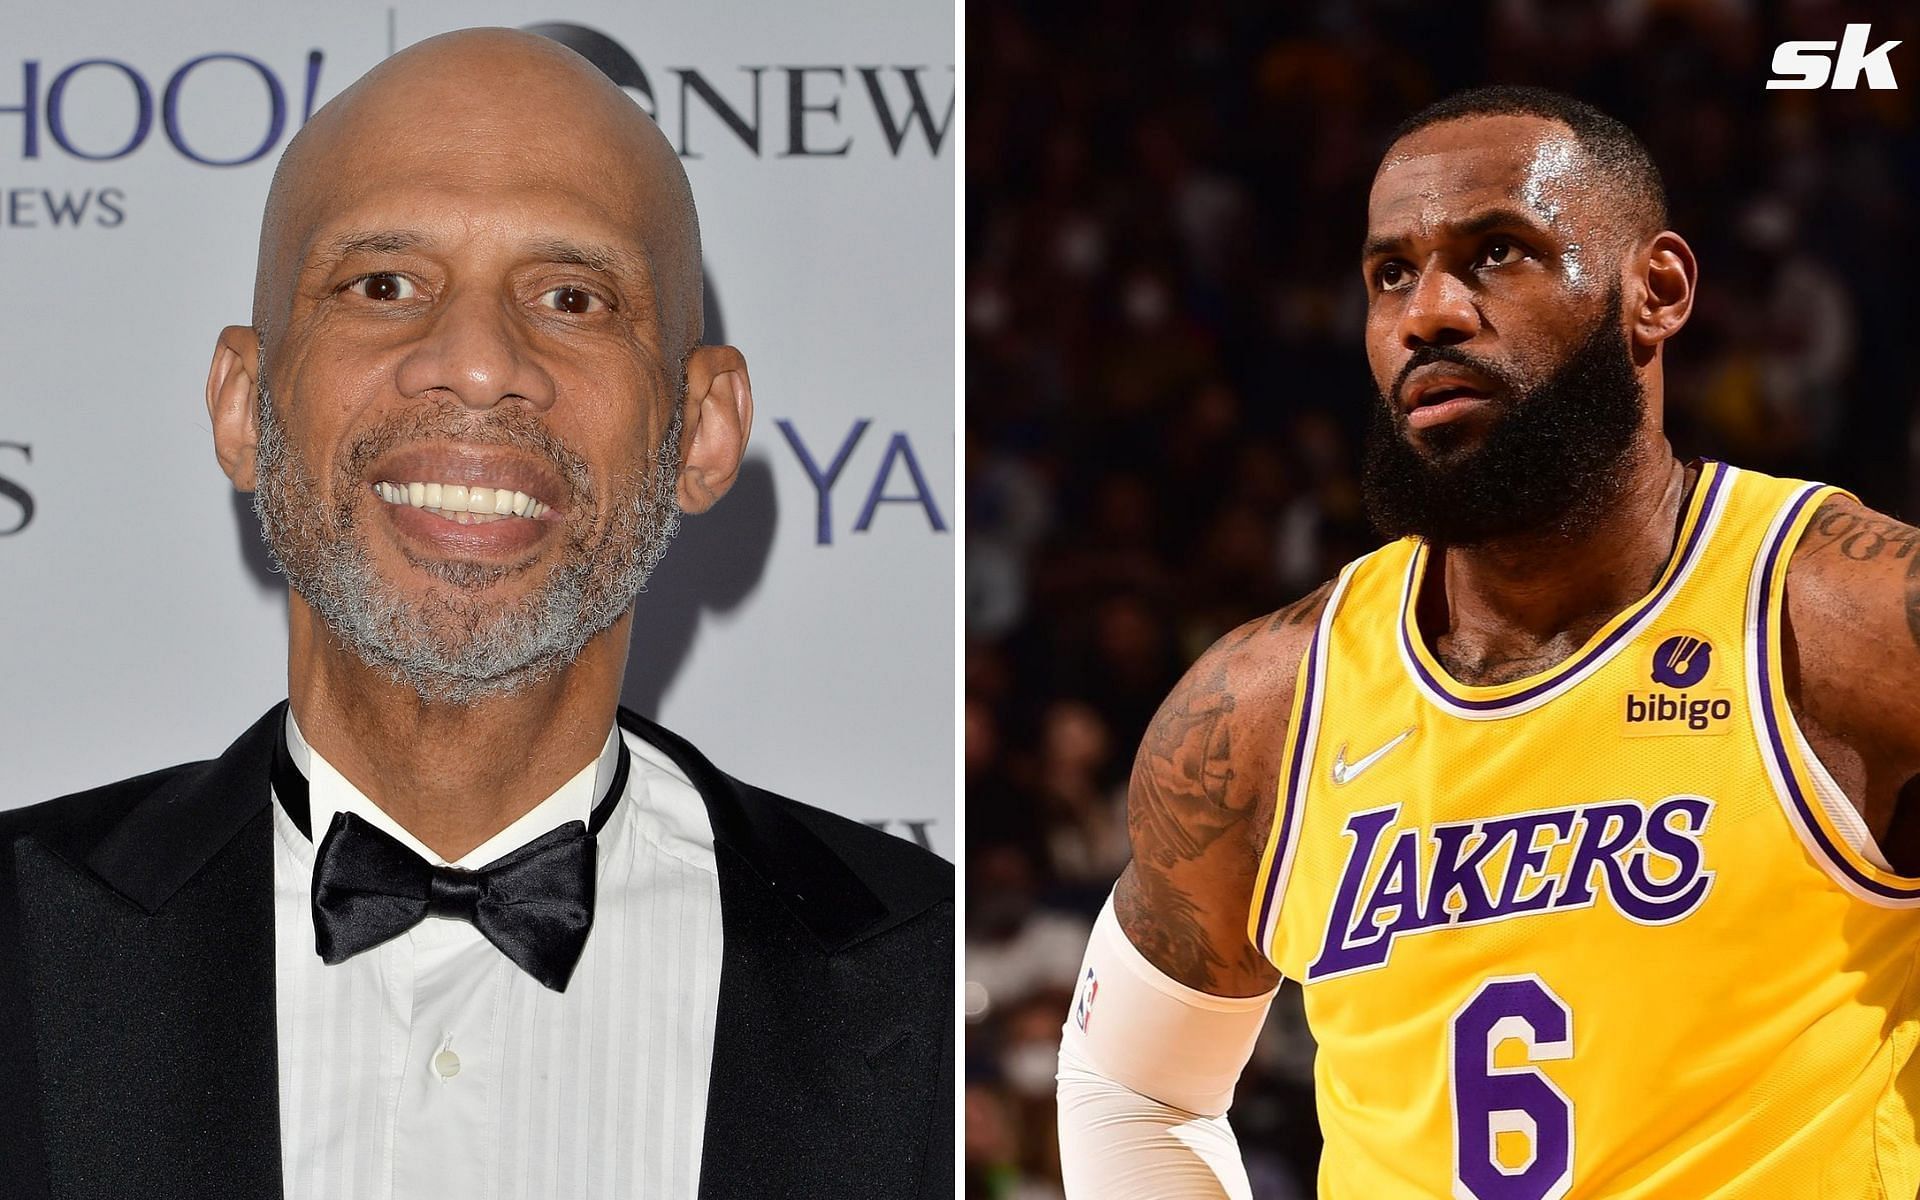 10 NBA Players With The Most All-Star Selections: LeBron James Can Break  Another Kareem Abdul-Jabbar Record - Fadeaway World